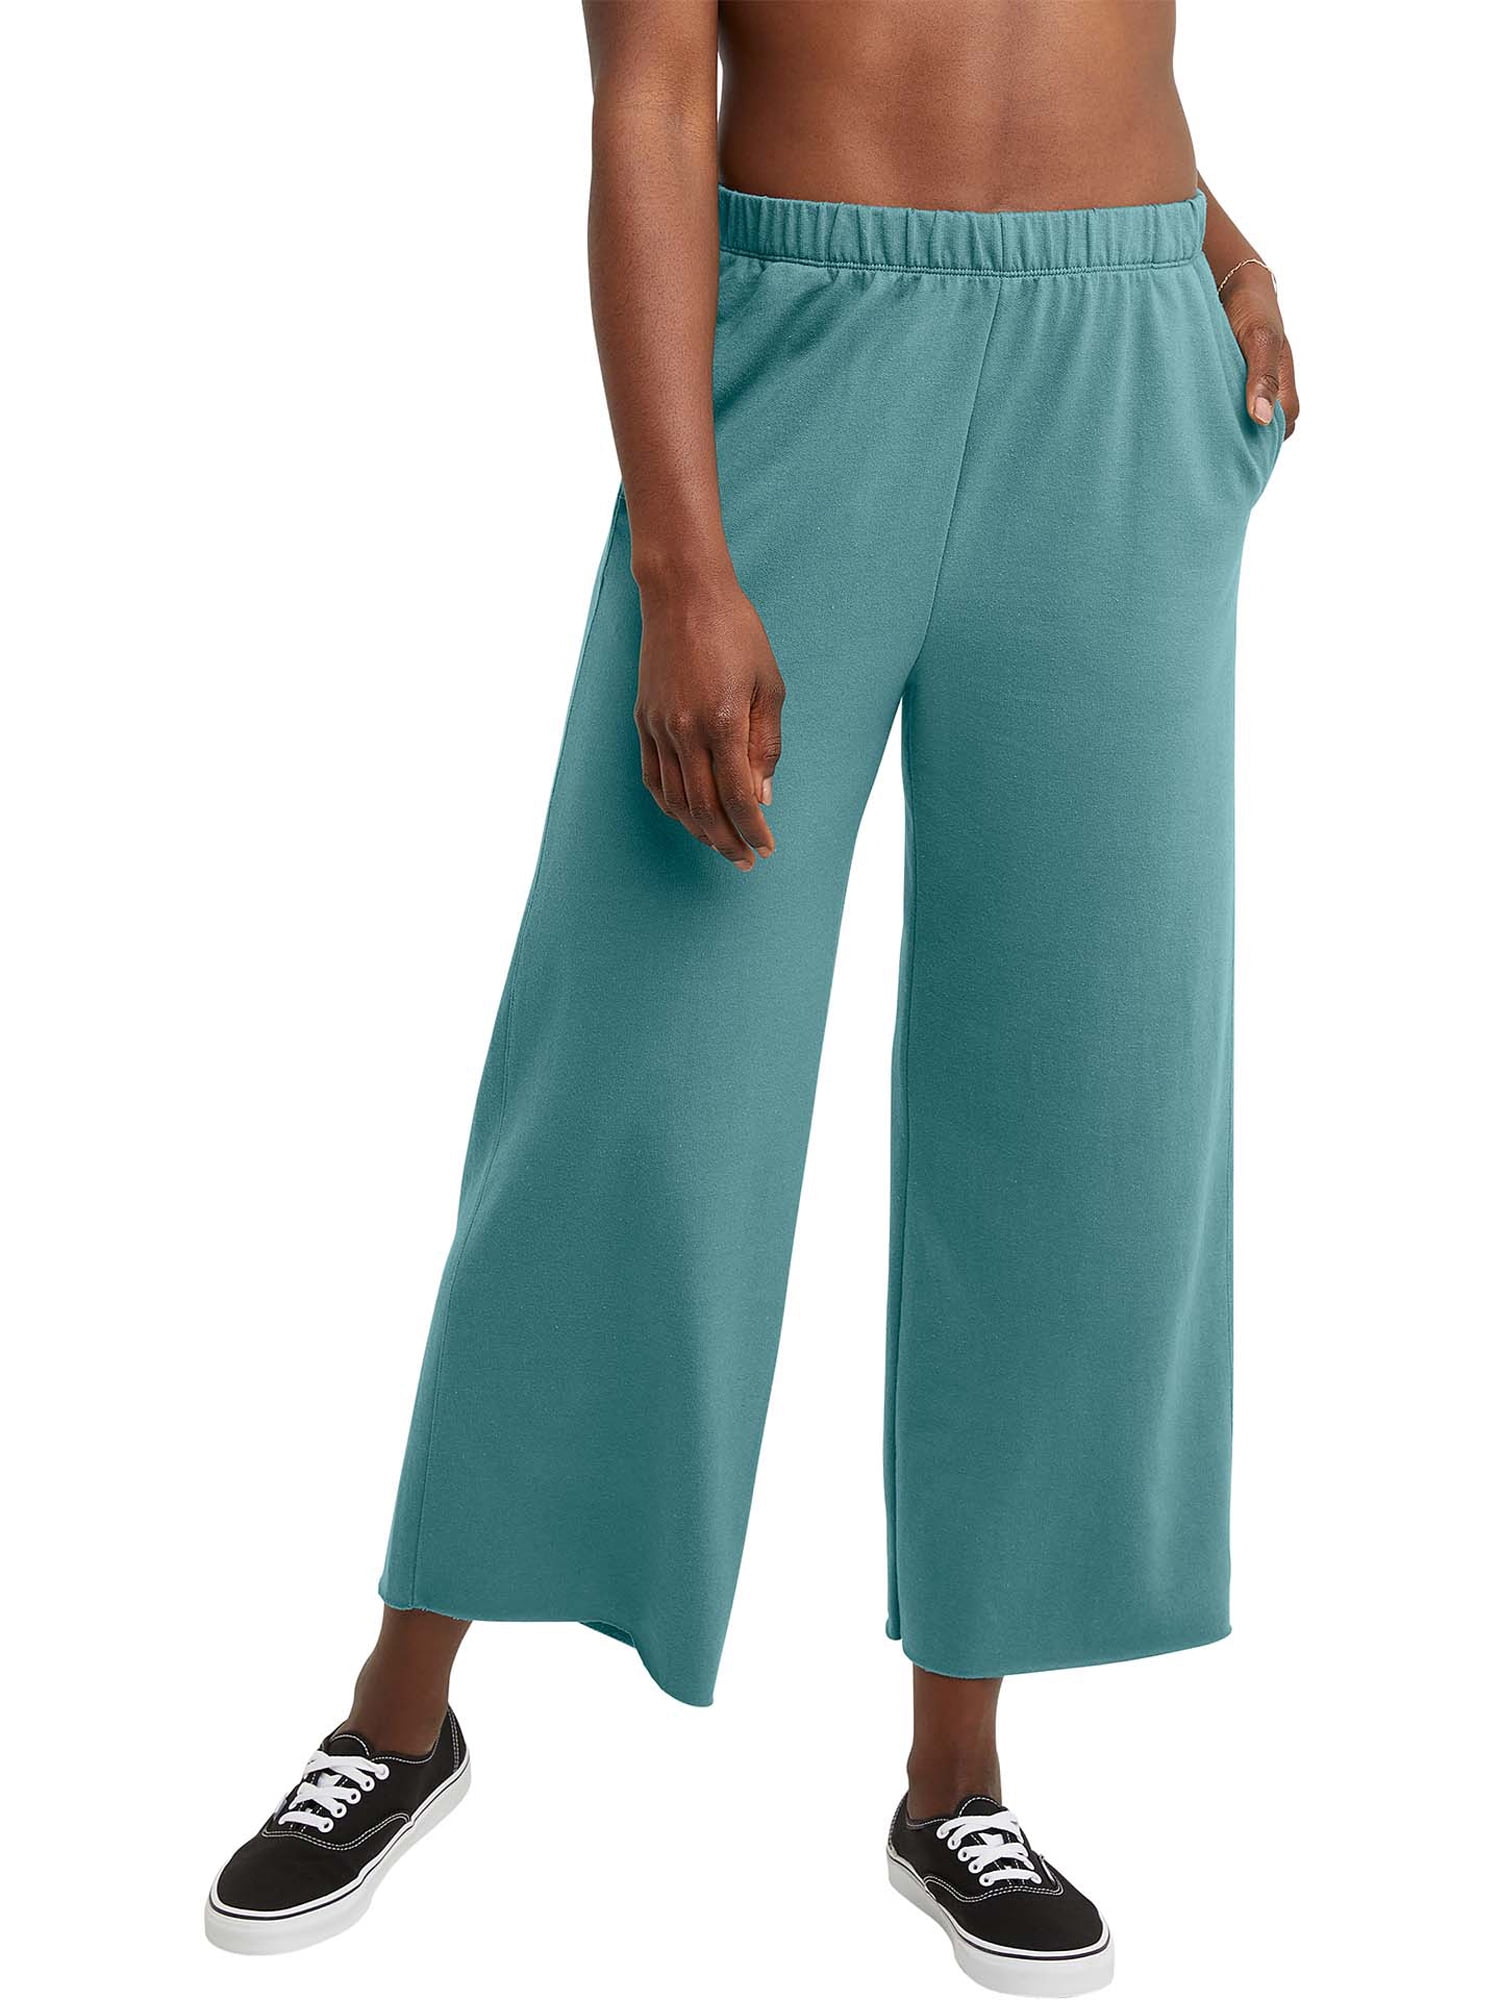 Hanes Women's French Terry Cloth Pants with Pockets, 30” Inseam, Sizes S-XXL